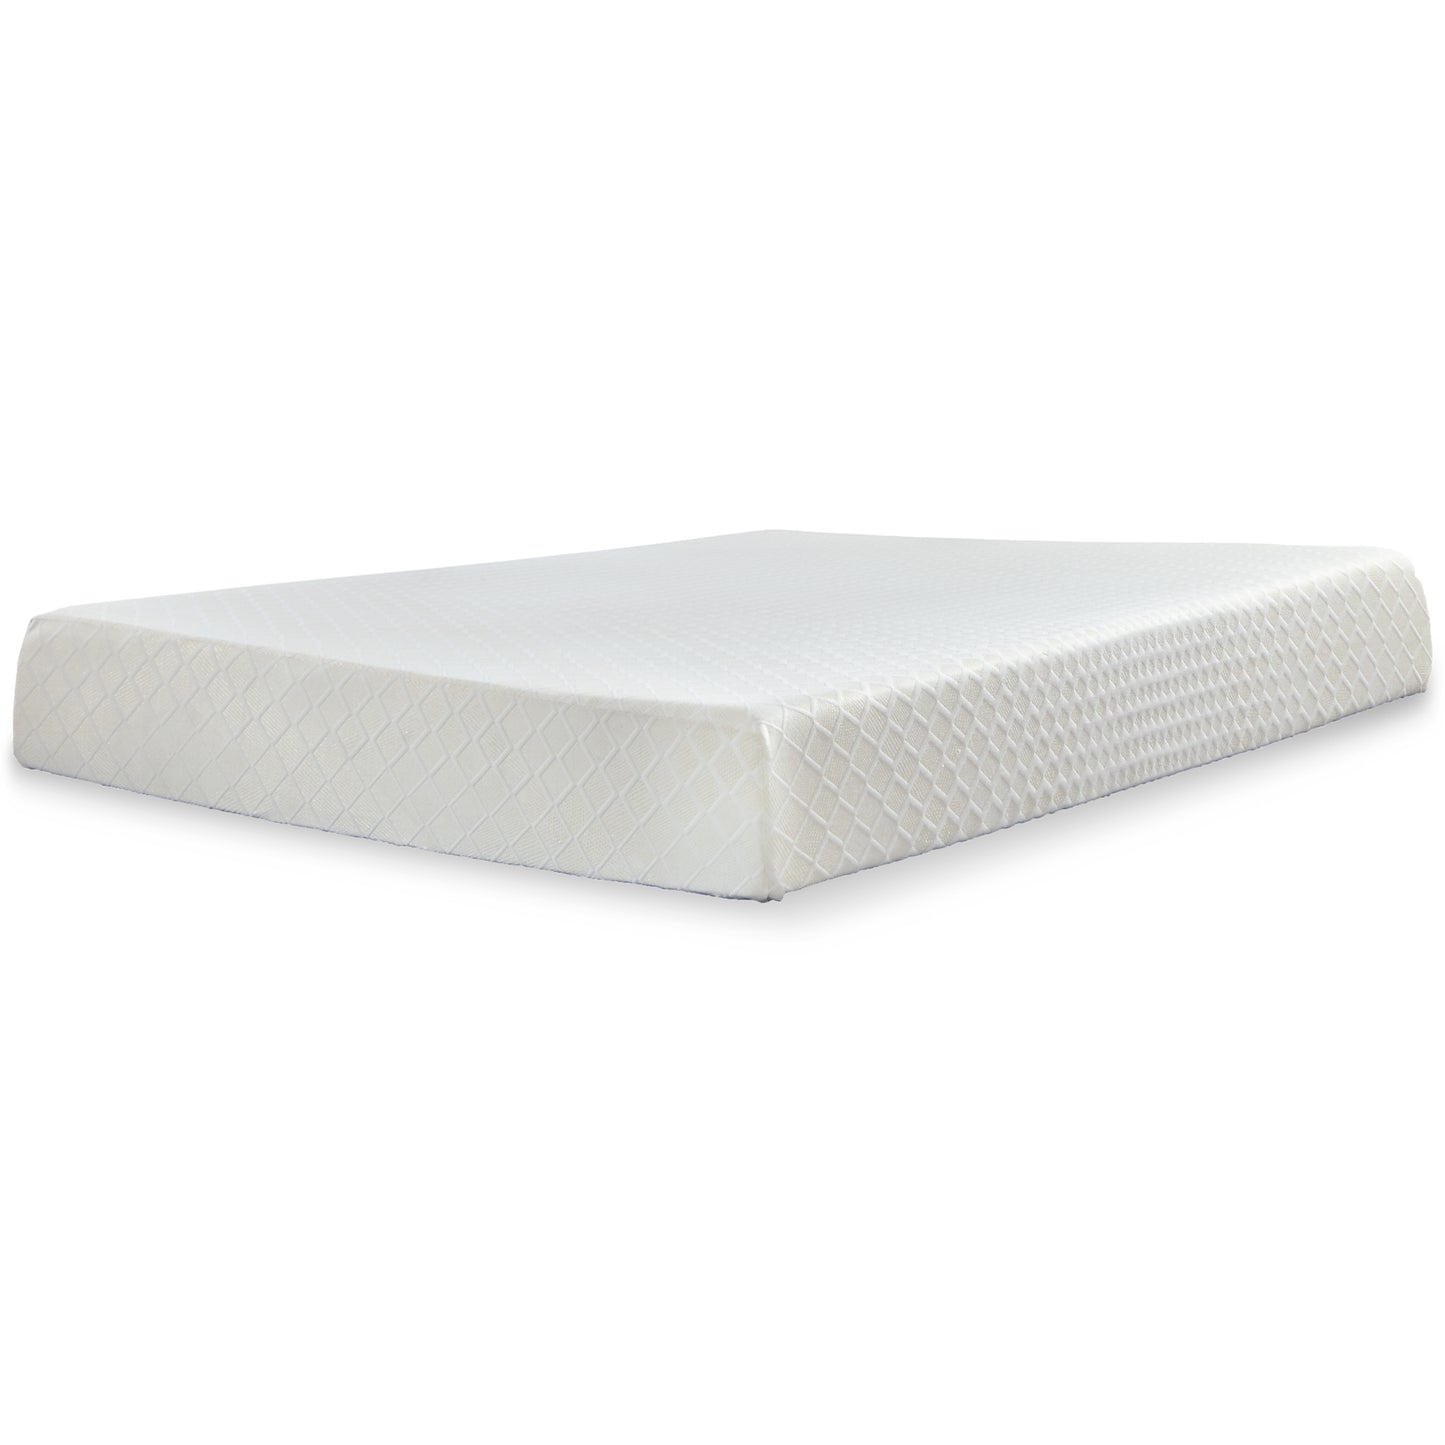 10 Inch Chime Memory Foam Mattress with Foundation